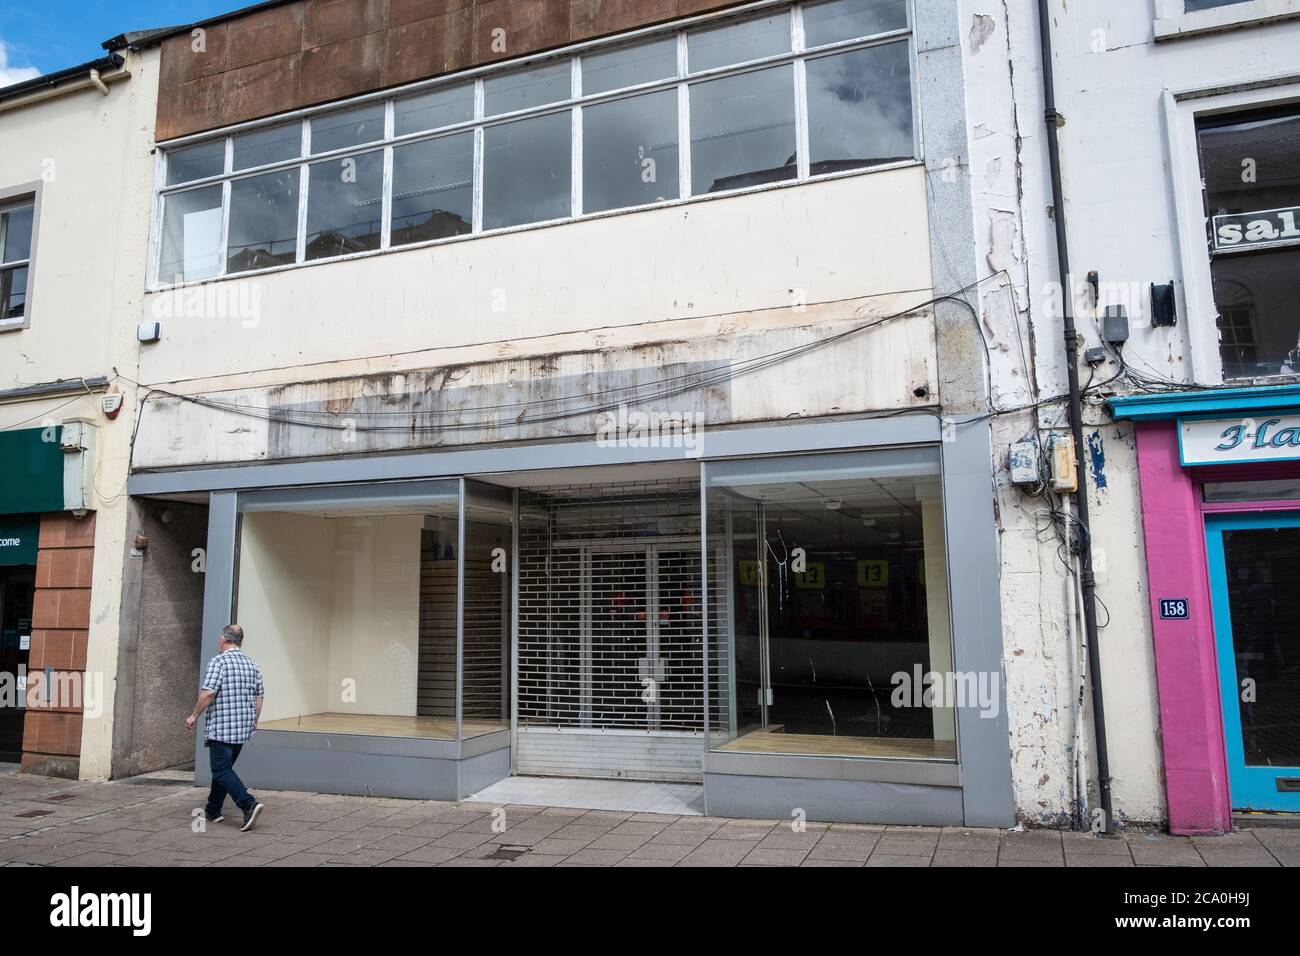 The Ryman stationery store in Dumfries, Scotland, closed after nearly 25 years in the town.  The shop closed due to covid 19 but could not reopen. Stock Photo